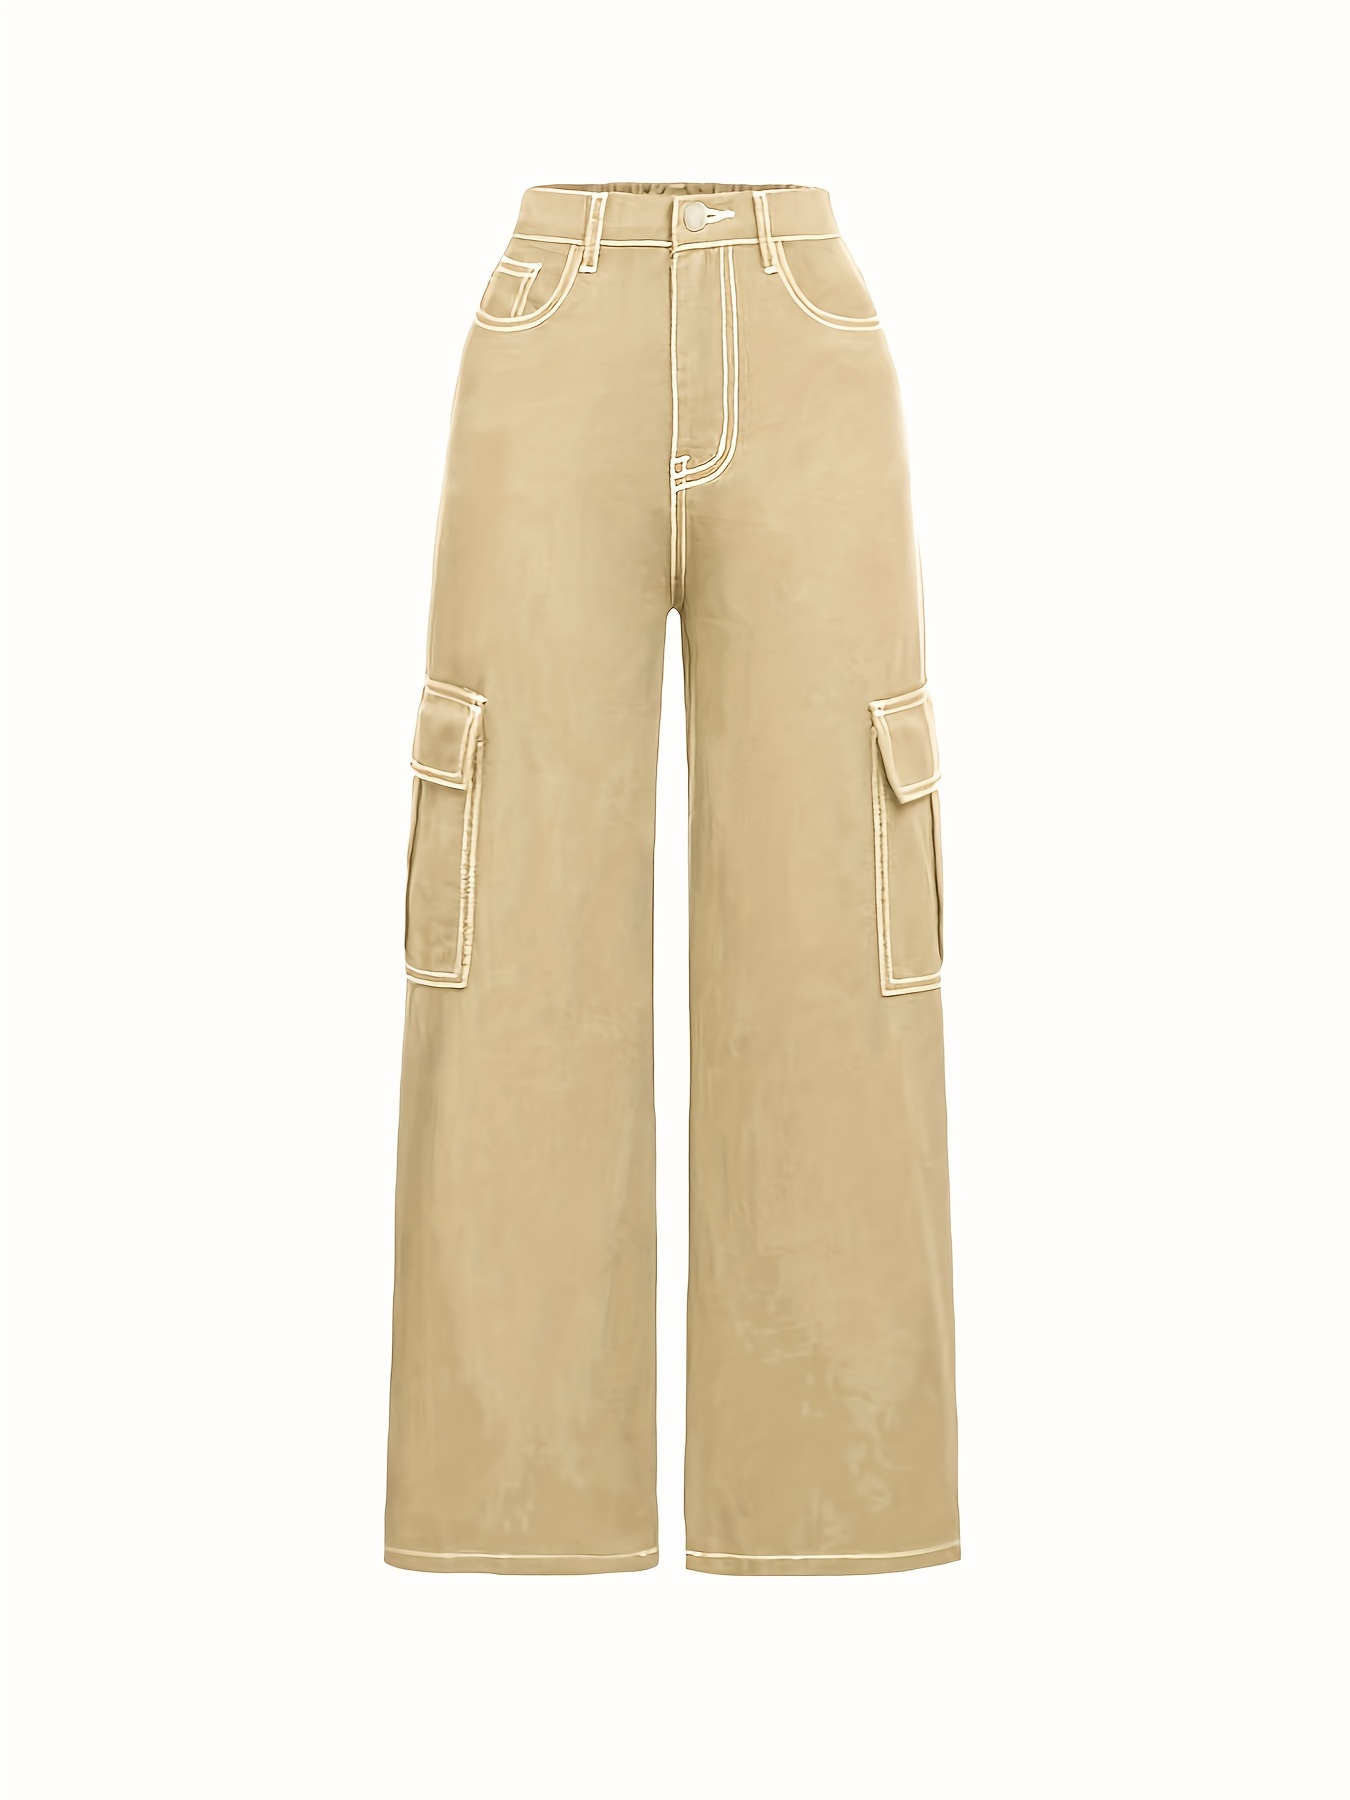 Khaki Cargo Jeans For Girls, High Rise Non-Stretch Denim Cargo Trousers  With Flap Pockets Solid Color